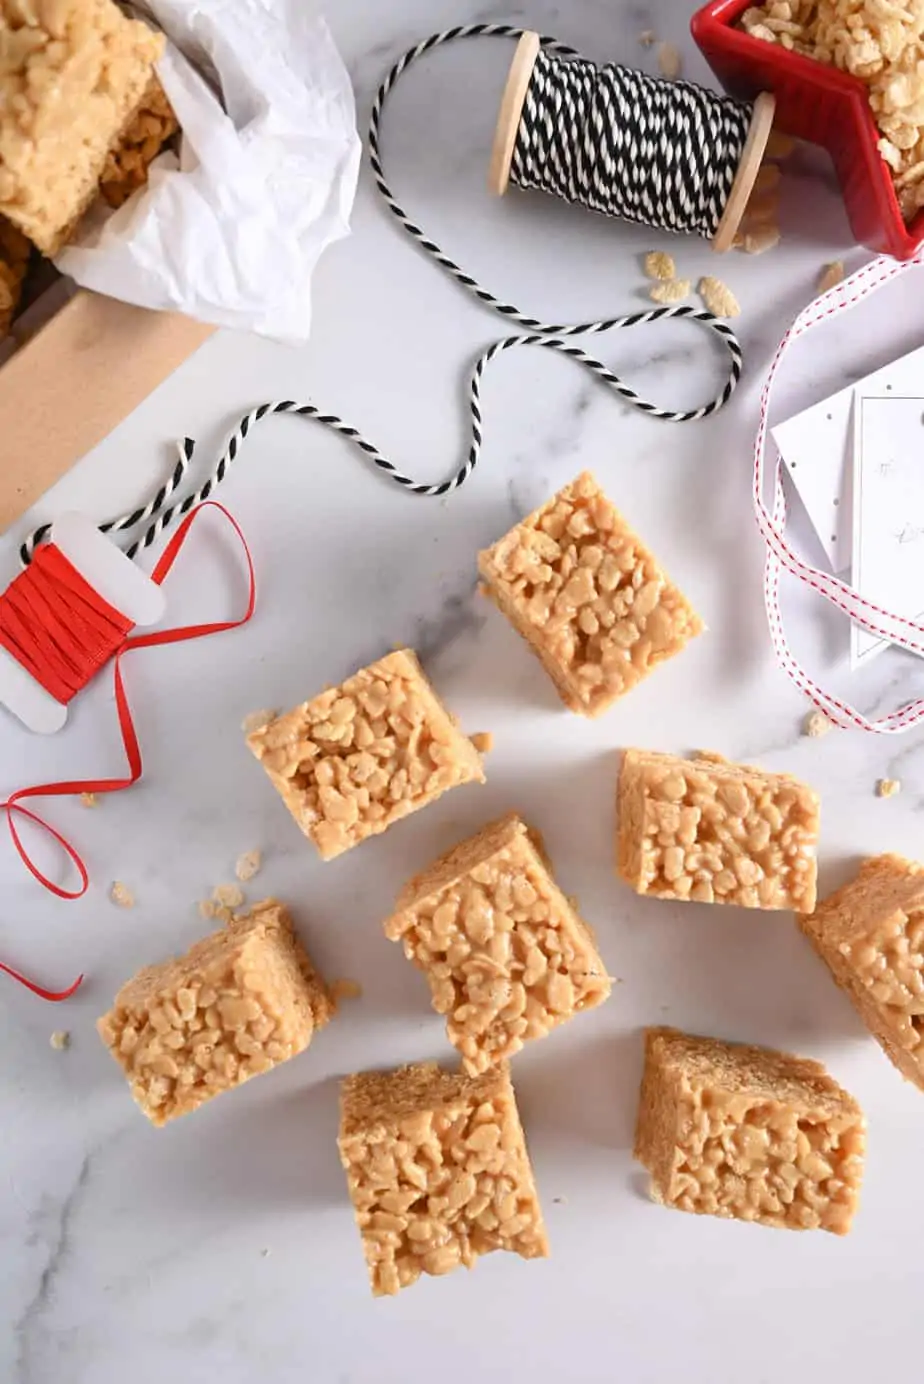 Several peanut butter rice krispie bars scattered on a marble countertop, about to be packaged up for the holidays.